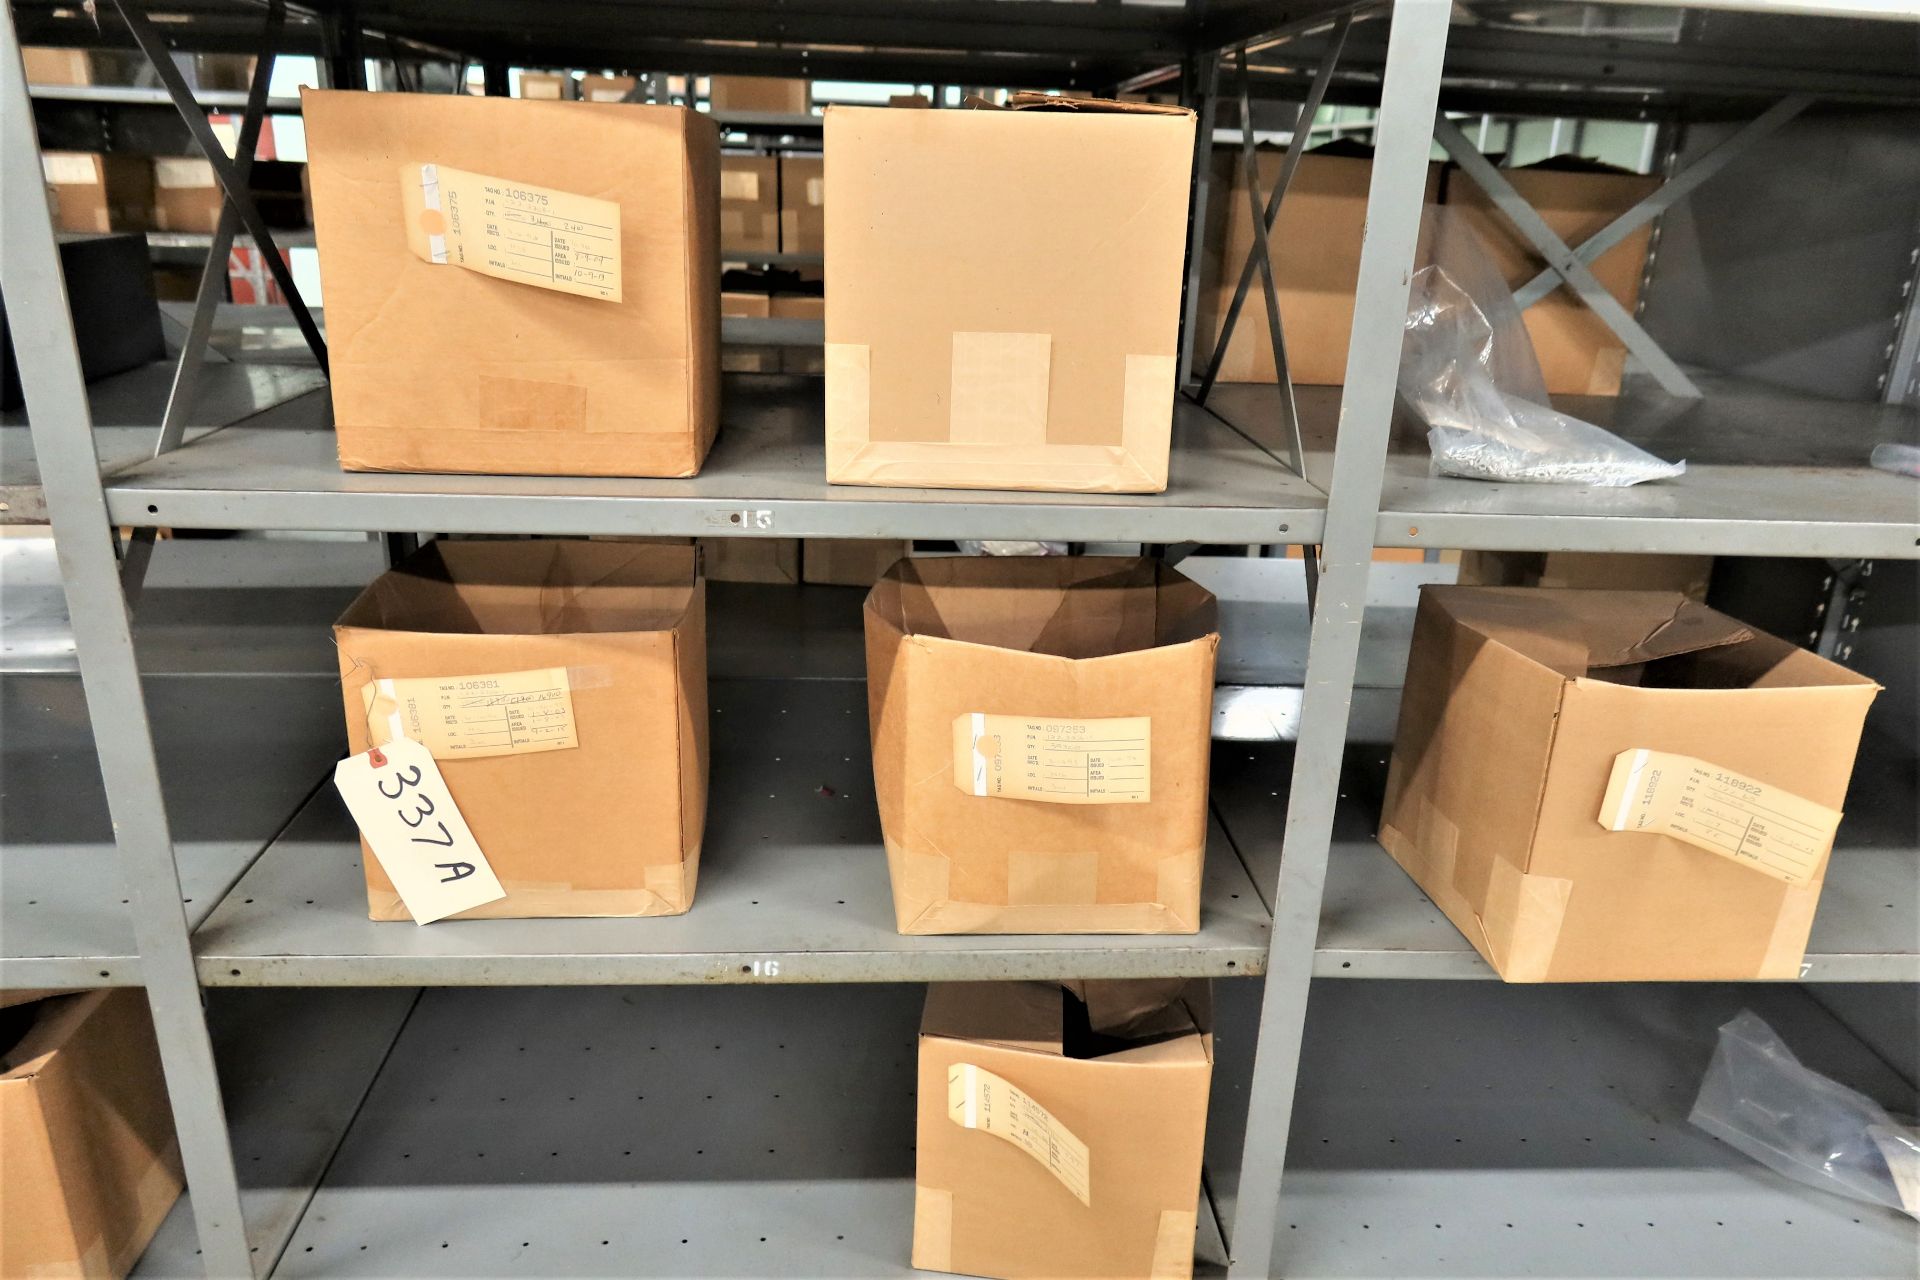 Surplus Crimp Connector inventory on Shelving from Lots 334-338